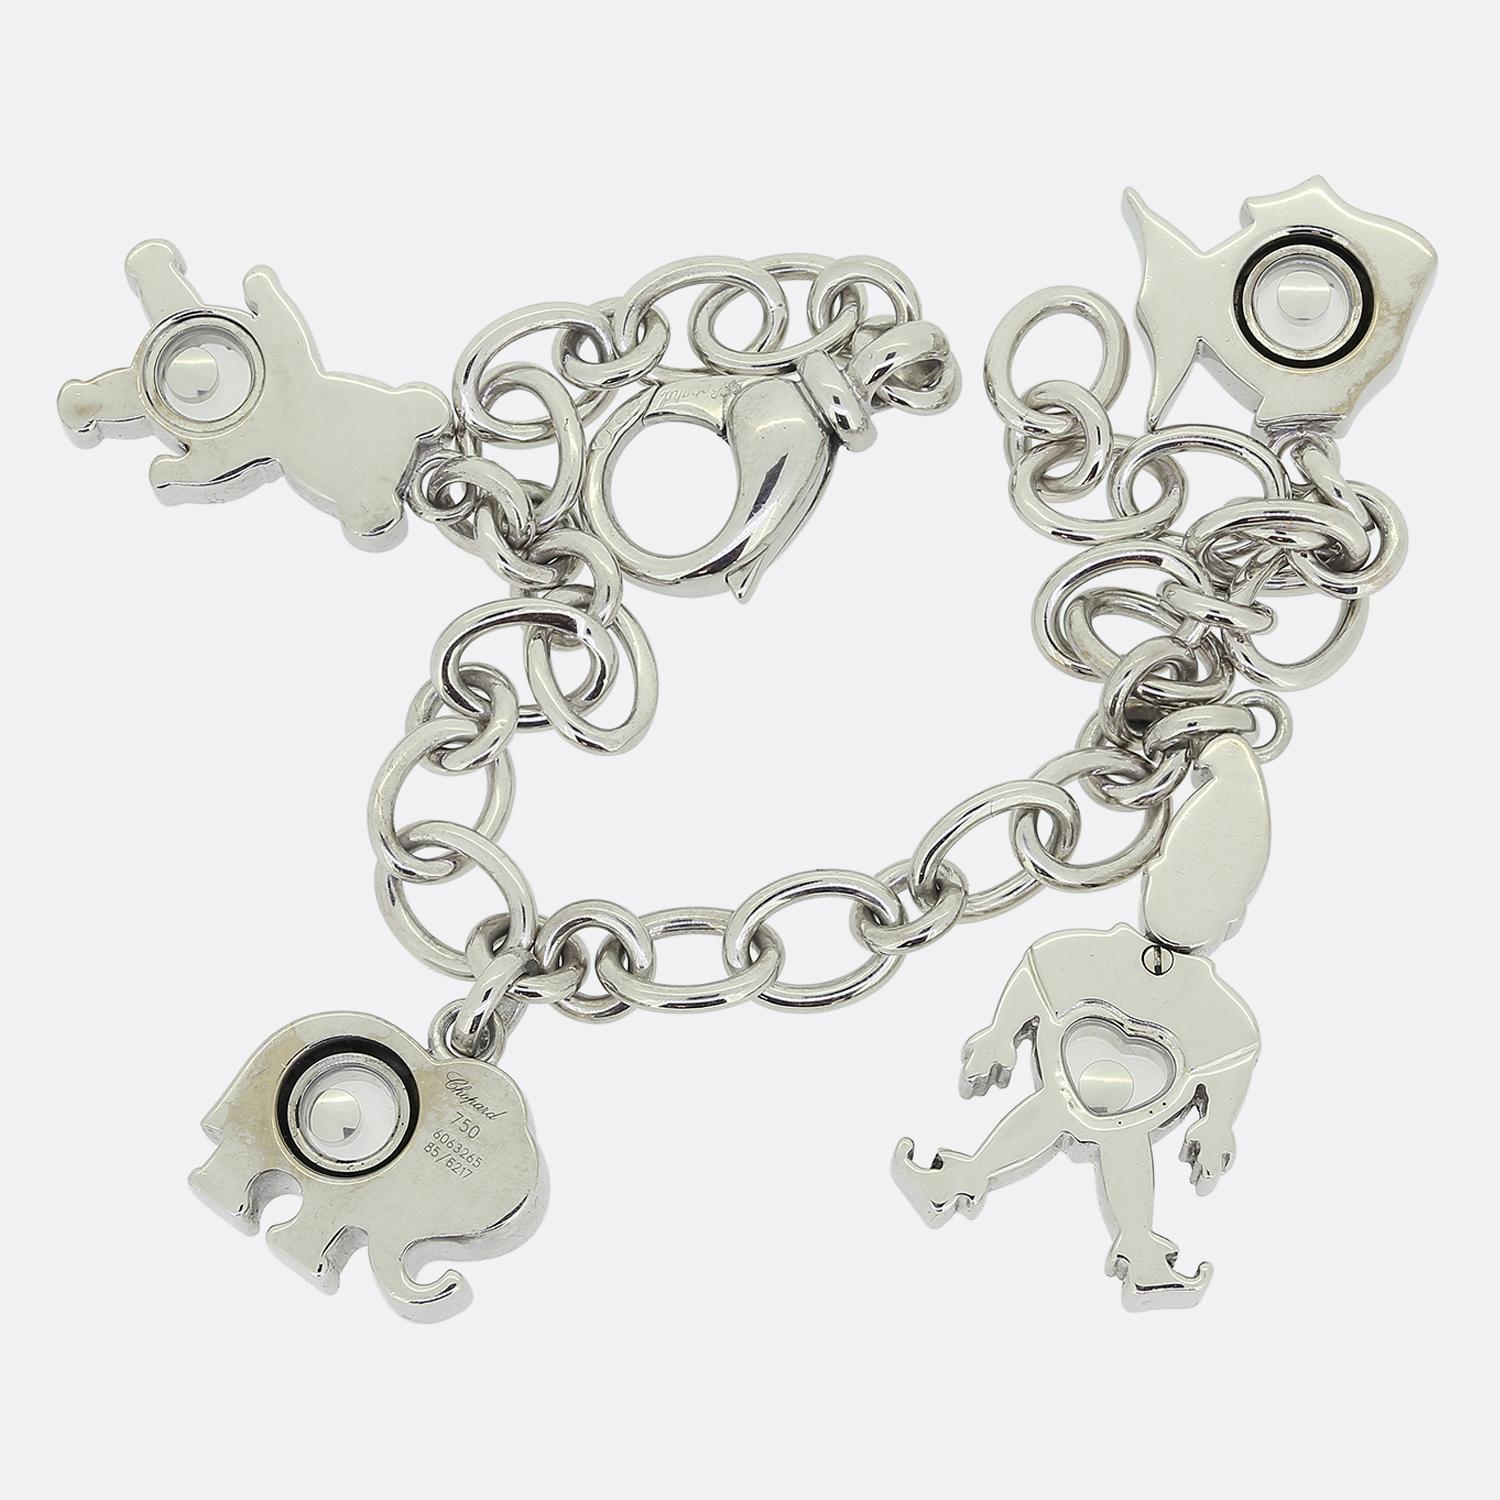 This is a wonderful charm bracelet from the world renowned luxury jewellery designer, Chopard. Crafted in 18ct white gold, this belcher style link bracelet features four large charms; A fish, a teddy bear, an elephant and a clown. Each of the charms